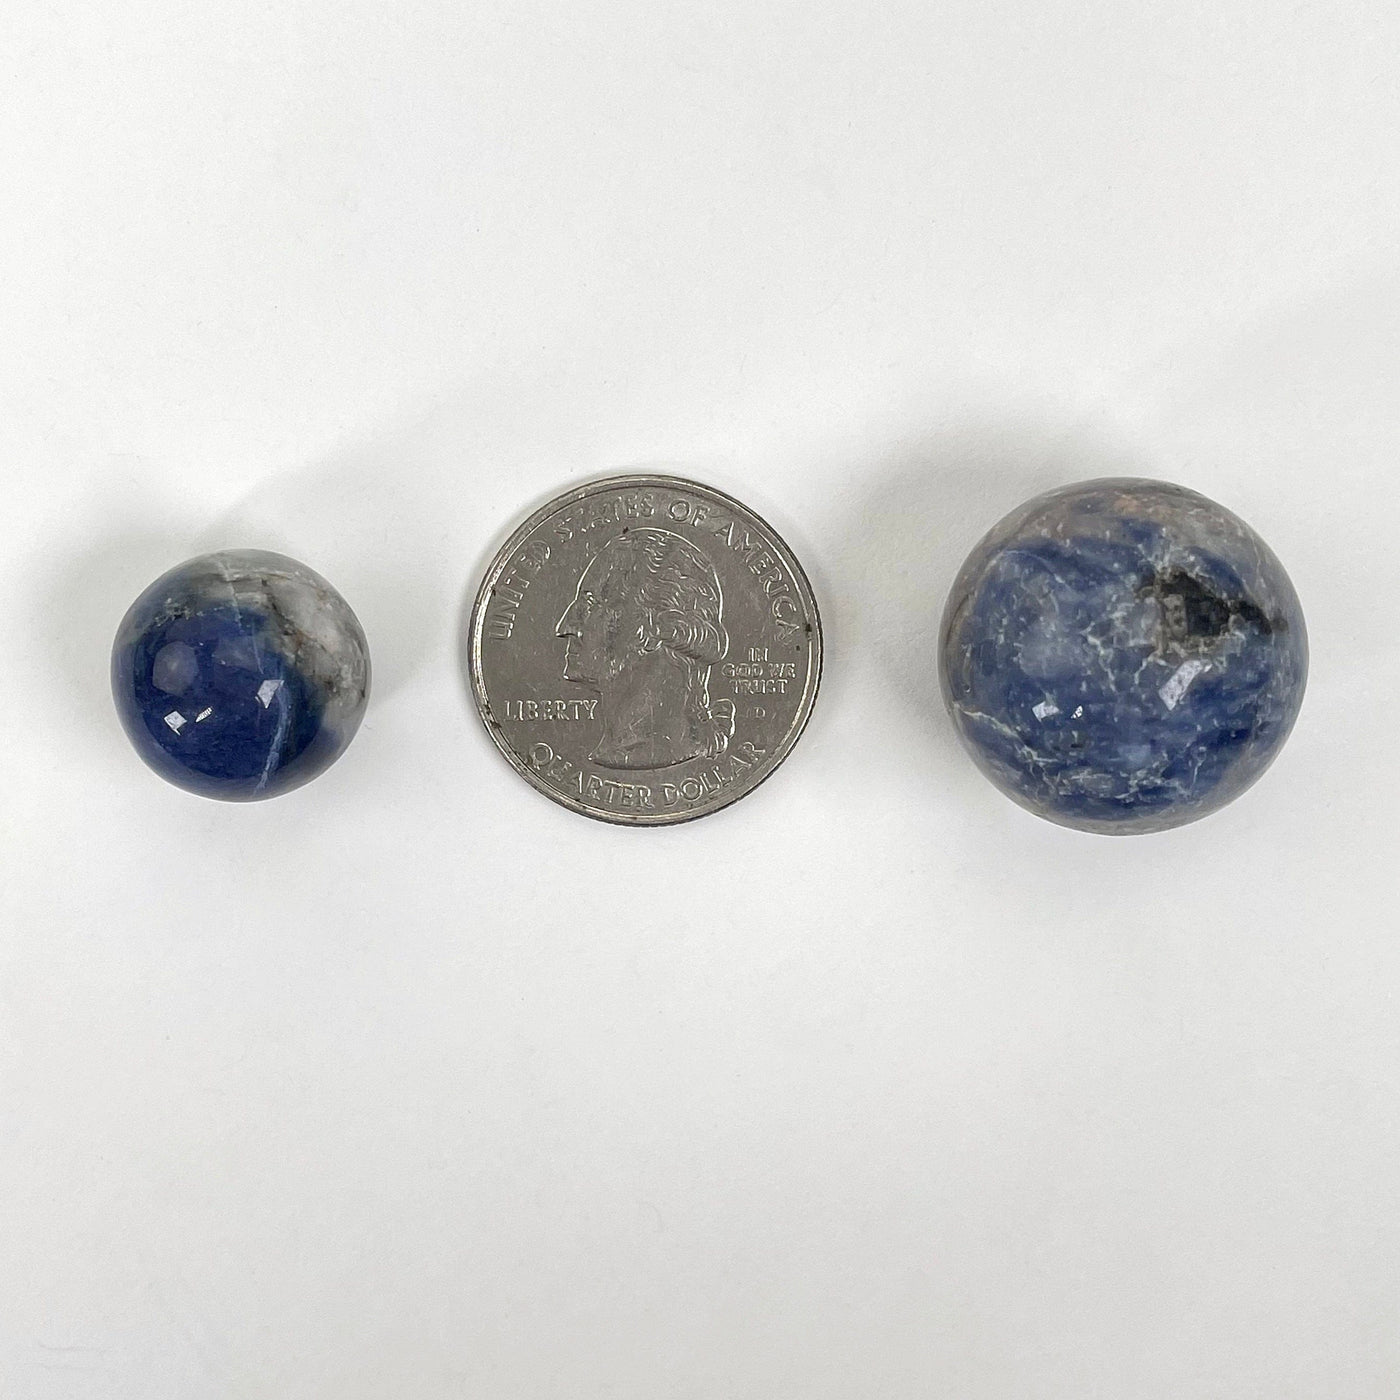 two sodalite sphere balls on white background with quarter for size reference